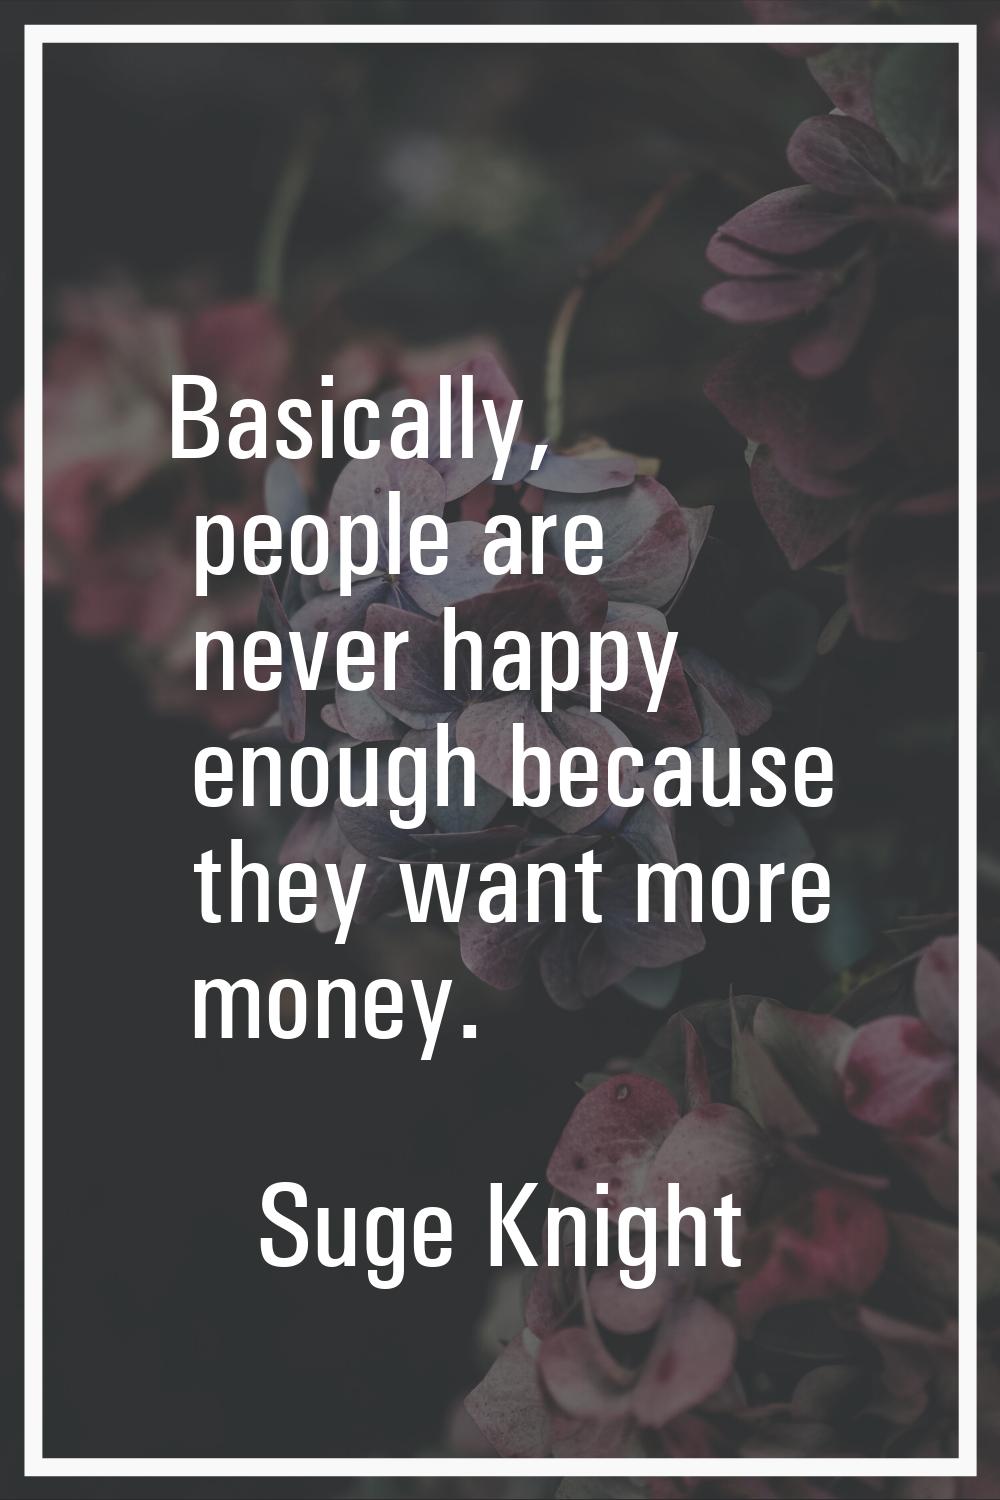 Basically, people are never happy enough because they want more money.